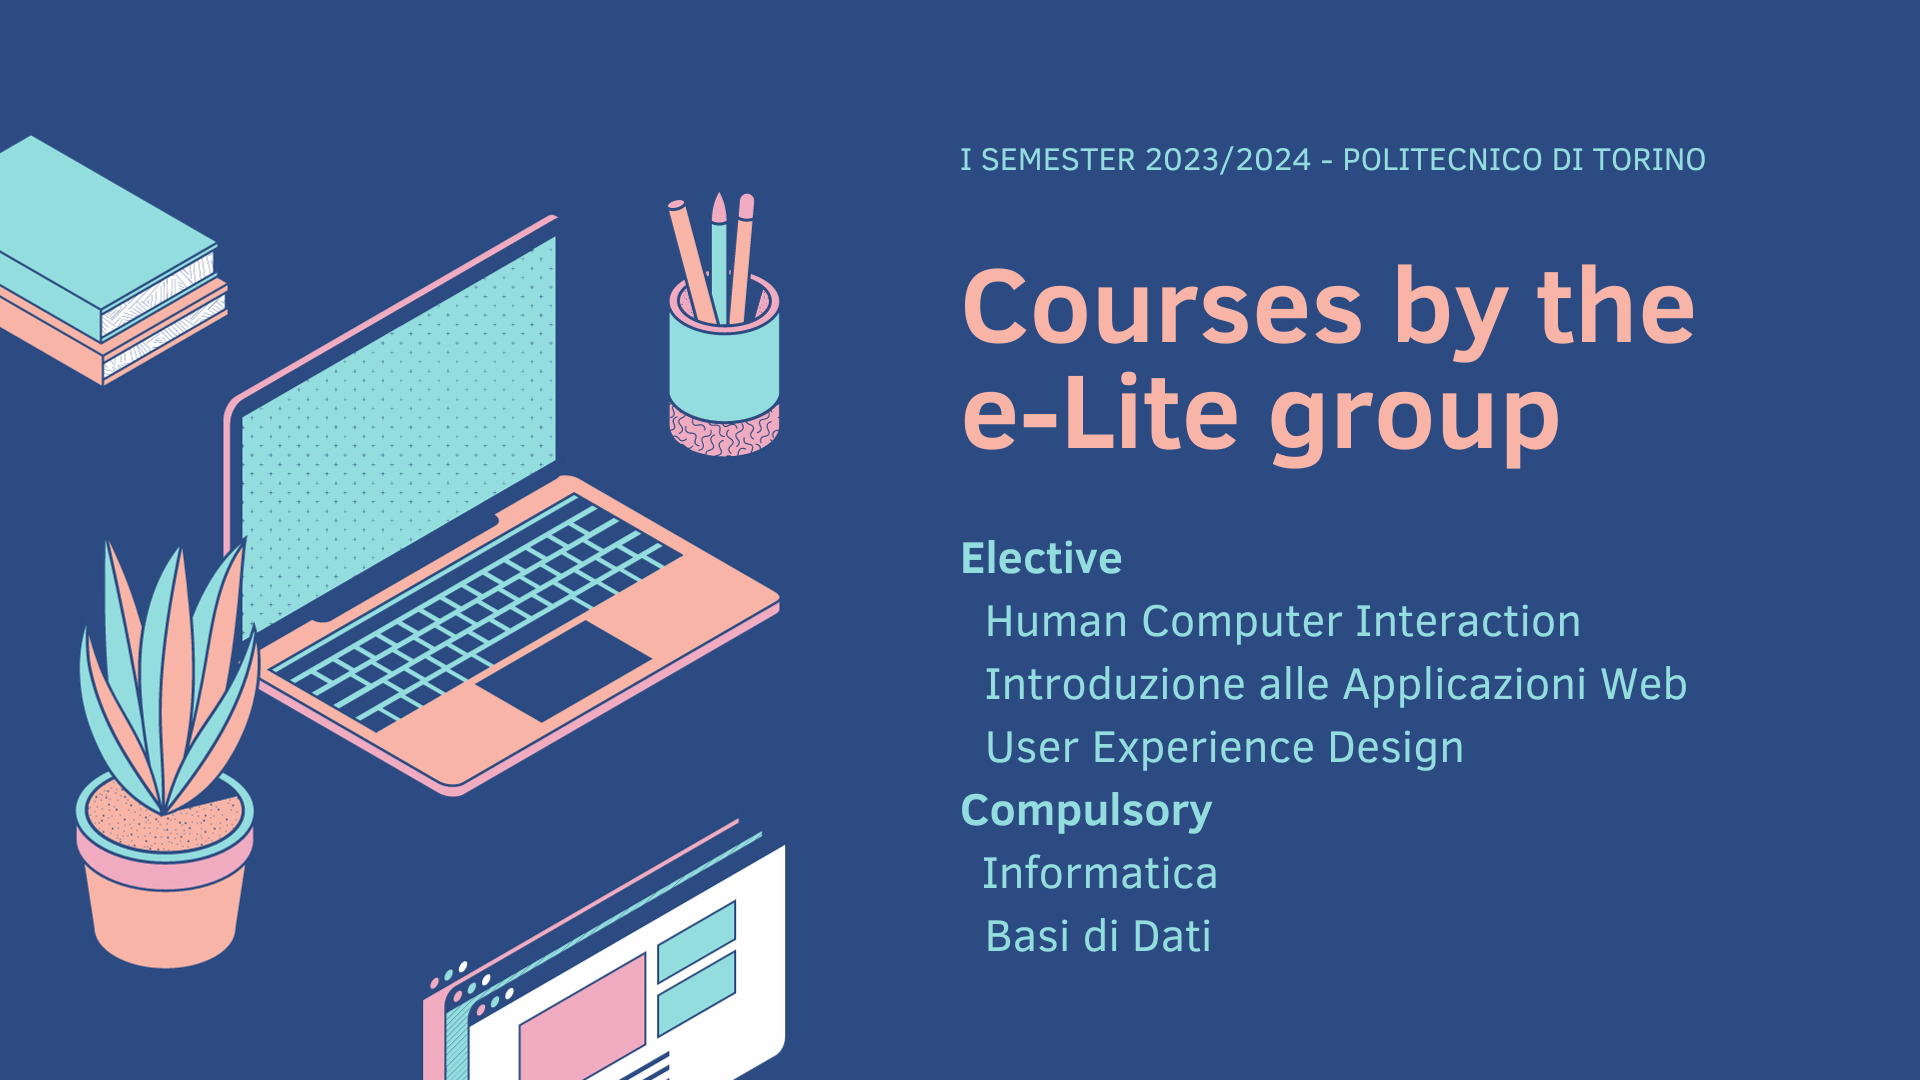 e-Lite courses in the first semester: introduction to web application, user experience design, human computer interaction, database, computer science